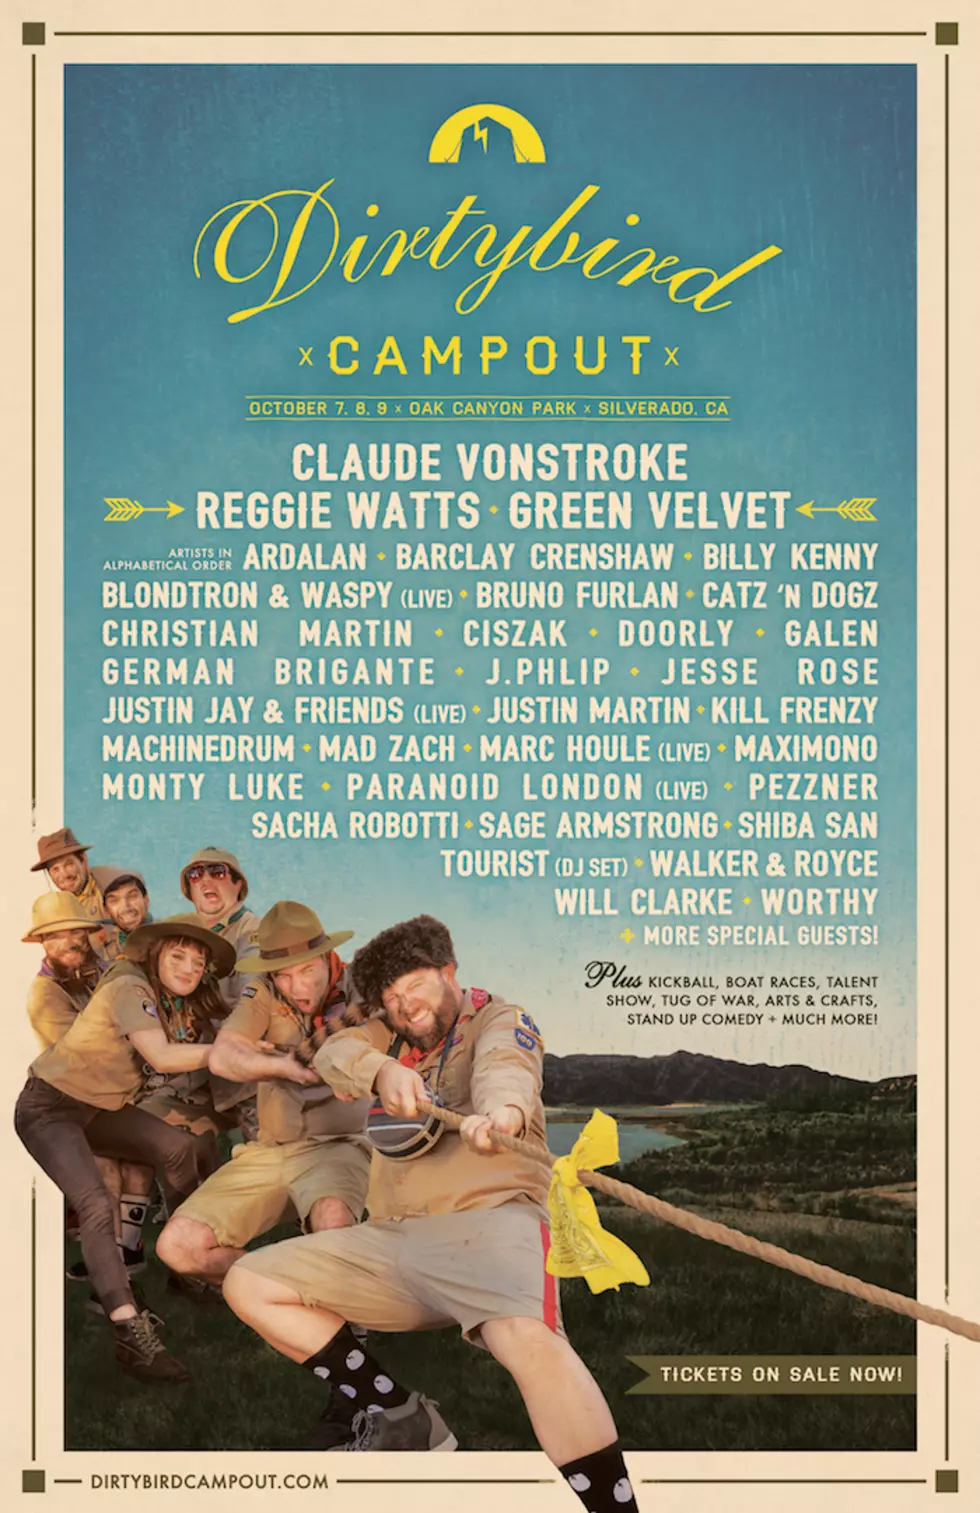 DIRTYBIRD Releases Phase 2 Lineup for CAMPOUT in Silverado Oct 7, 8 &#038; 9